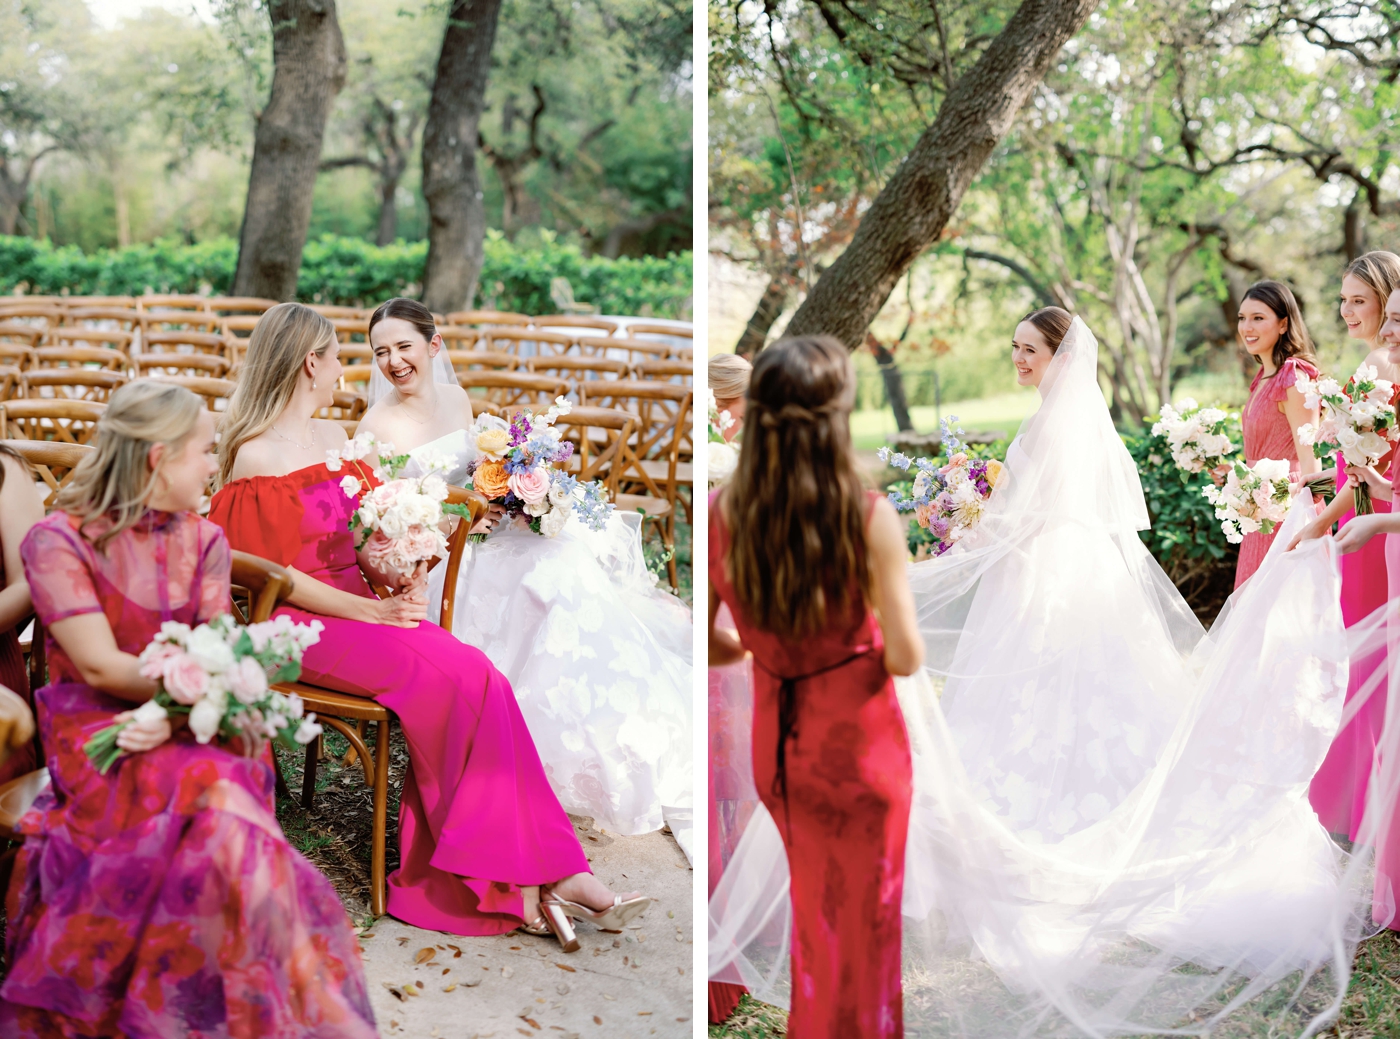 Colorful bridesmaids dresses in shades of pink and fuchsia, helping a bride get her pictures taken at Mattie's In Austin